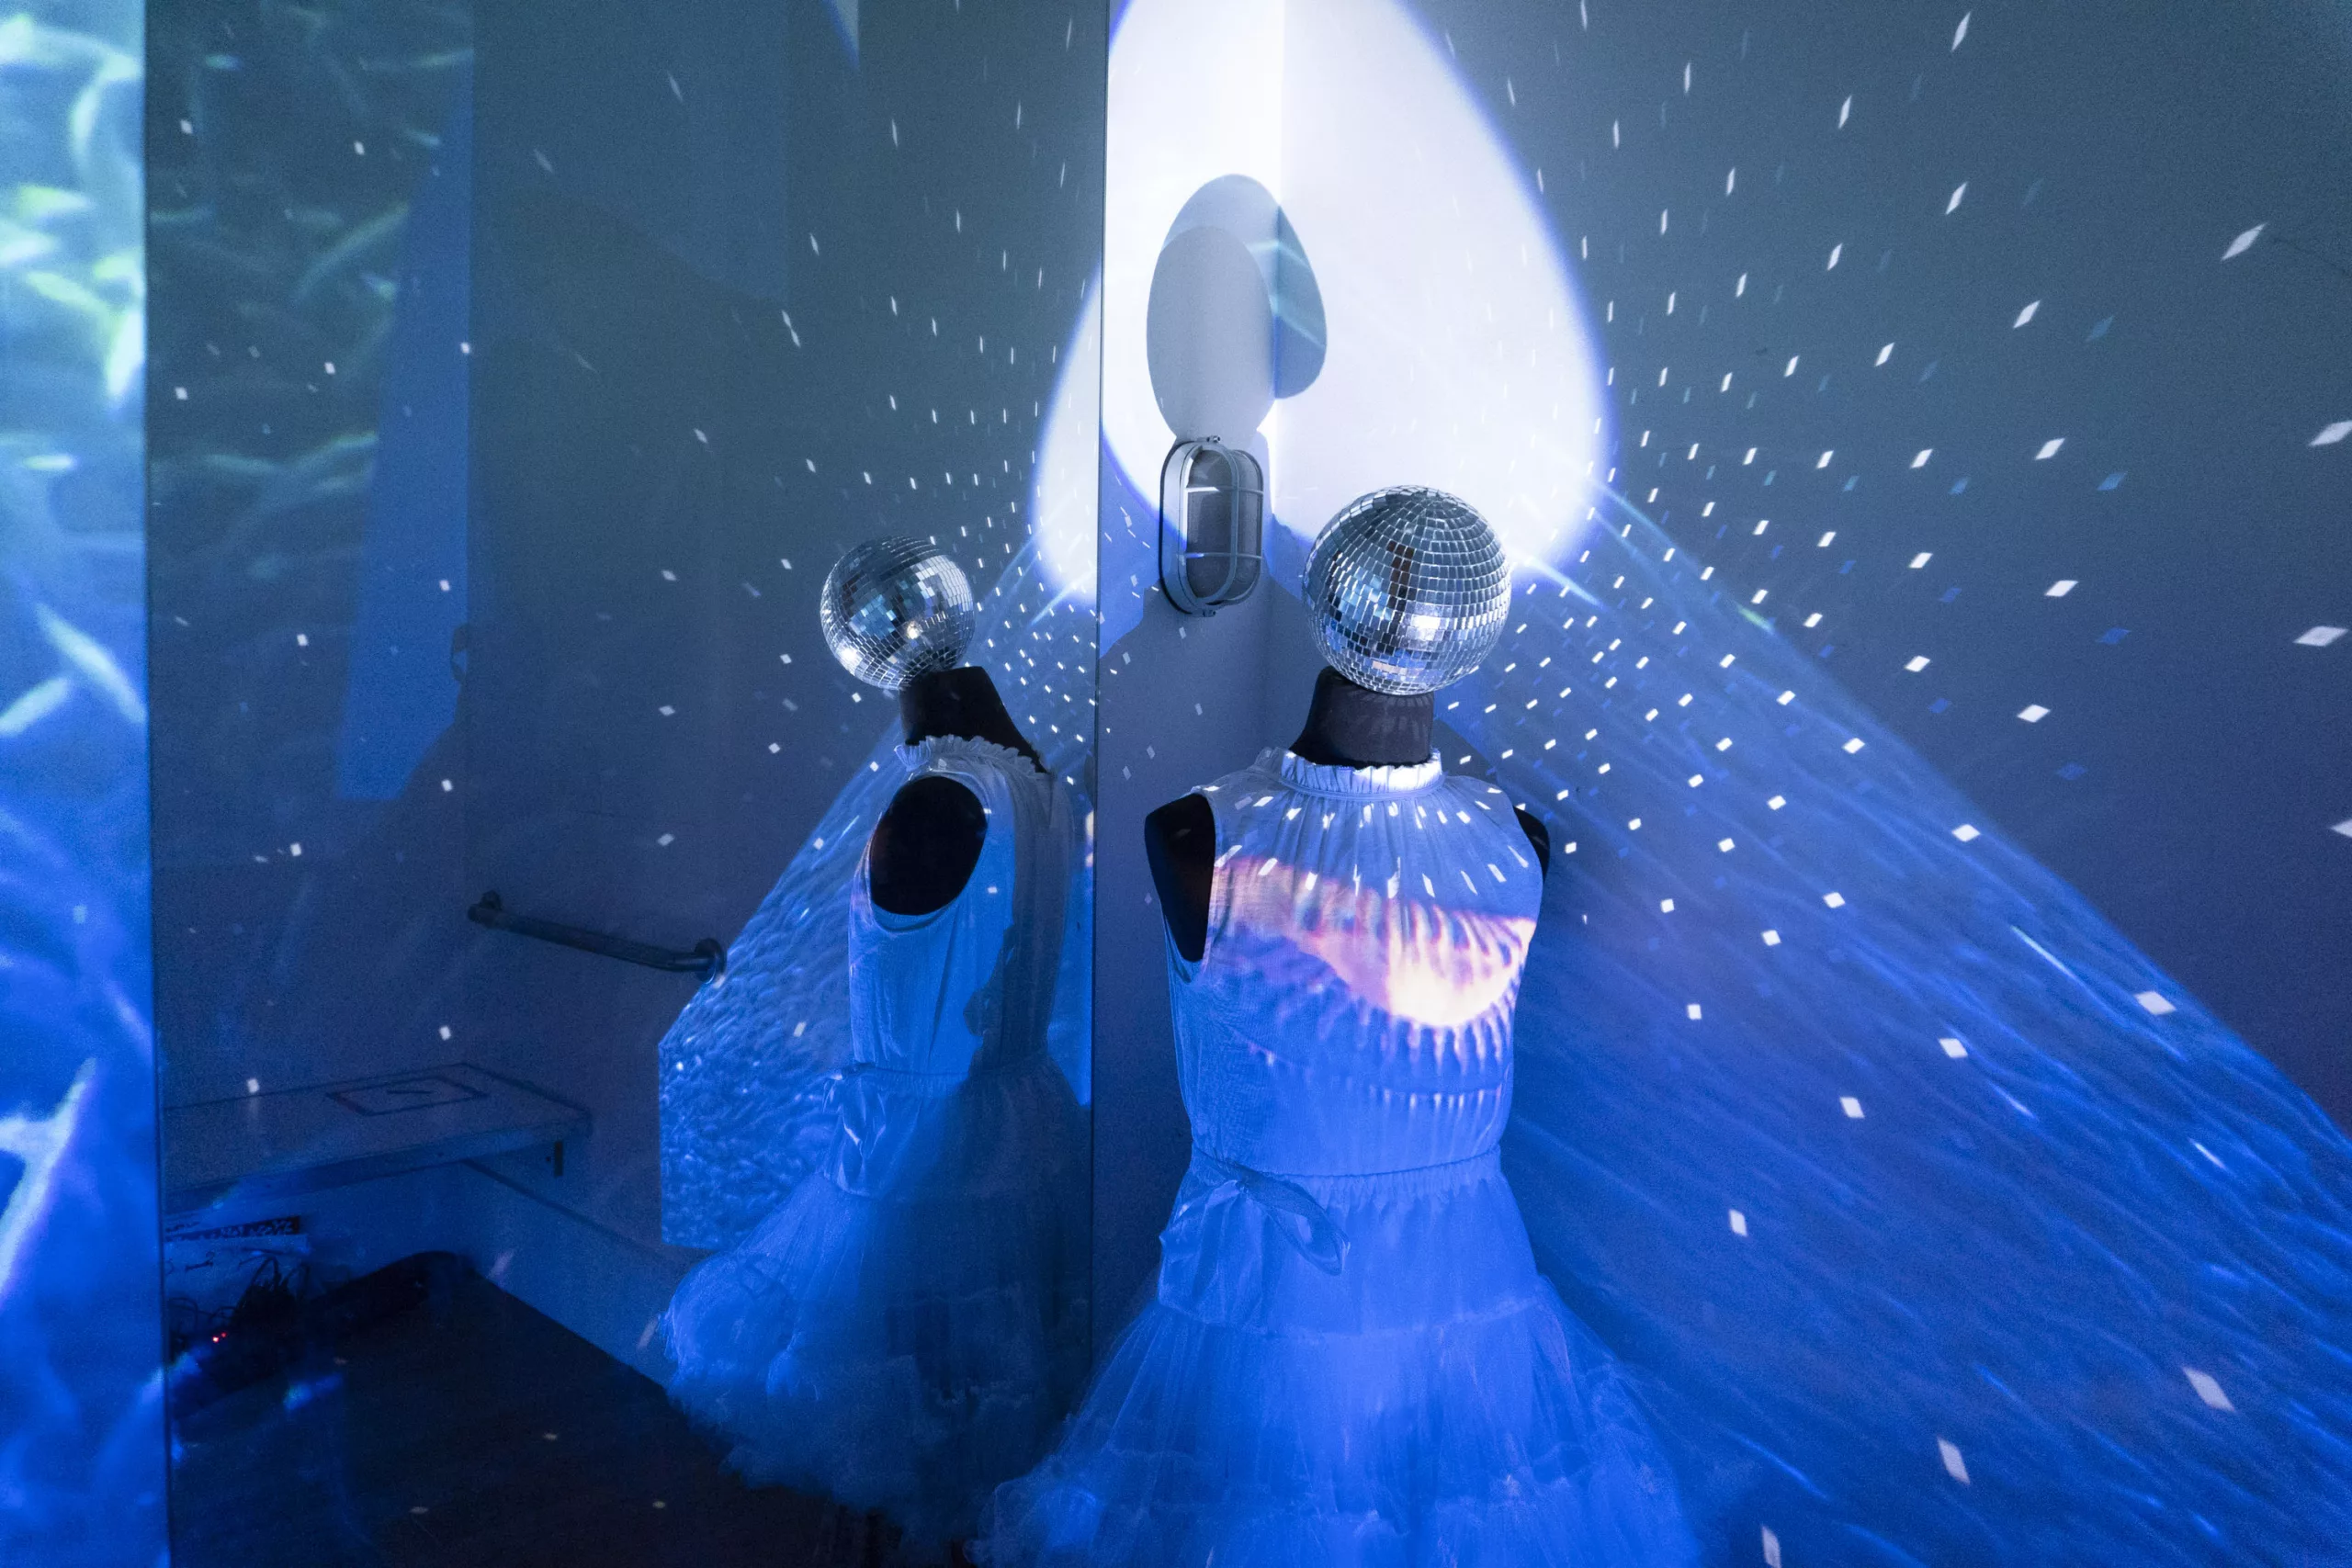 A mannequin in a flowy white dress faces away from the mirror of a fitting room. A sphere of mirrors acts as the mannequins face, reflecting light in all directions. The walls of the room are filled with projections of waves and sea life.